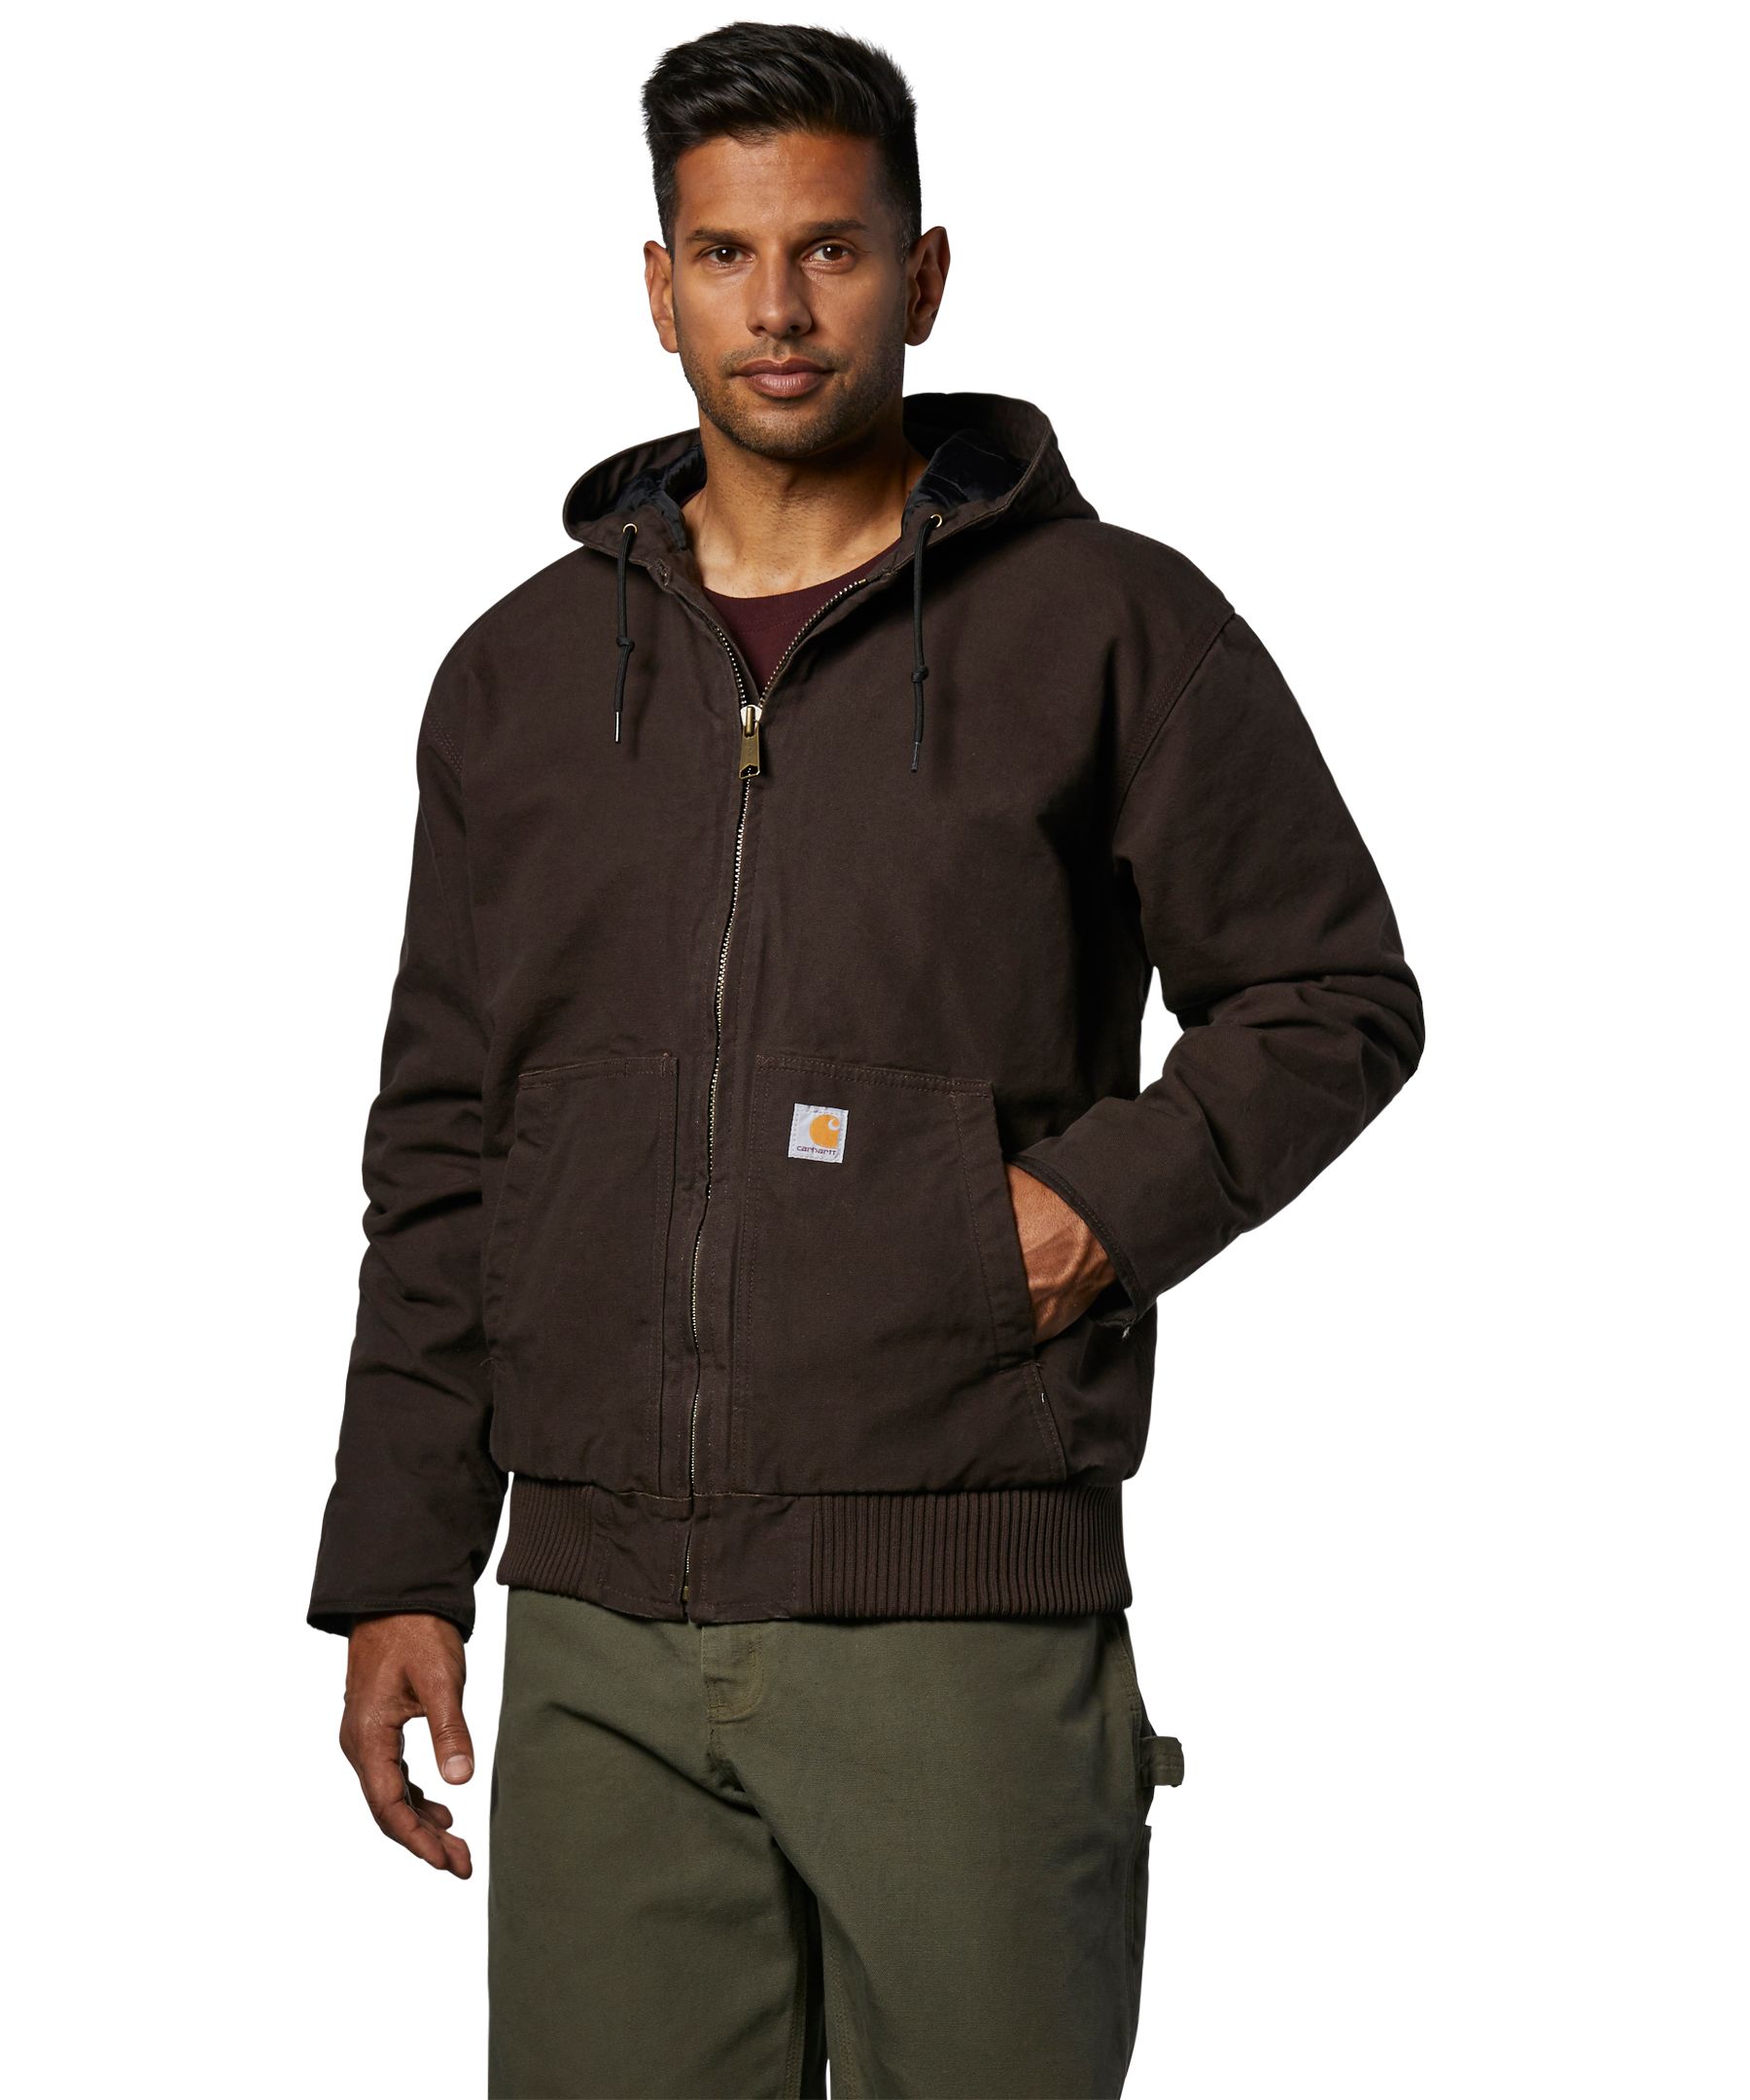 CARHARTT Hooded Jacket: Jacket, Men's, Jacket Garment, L, Black, Tall,  Insulated for Cold Conditions